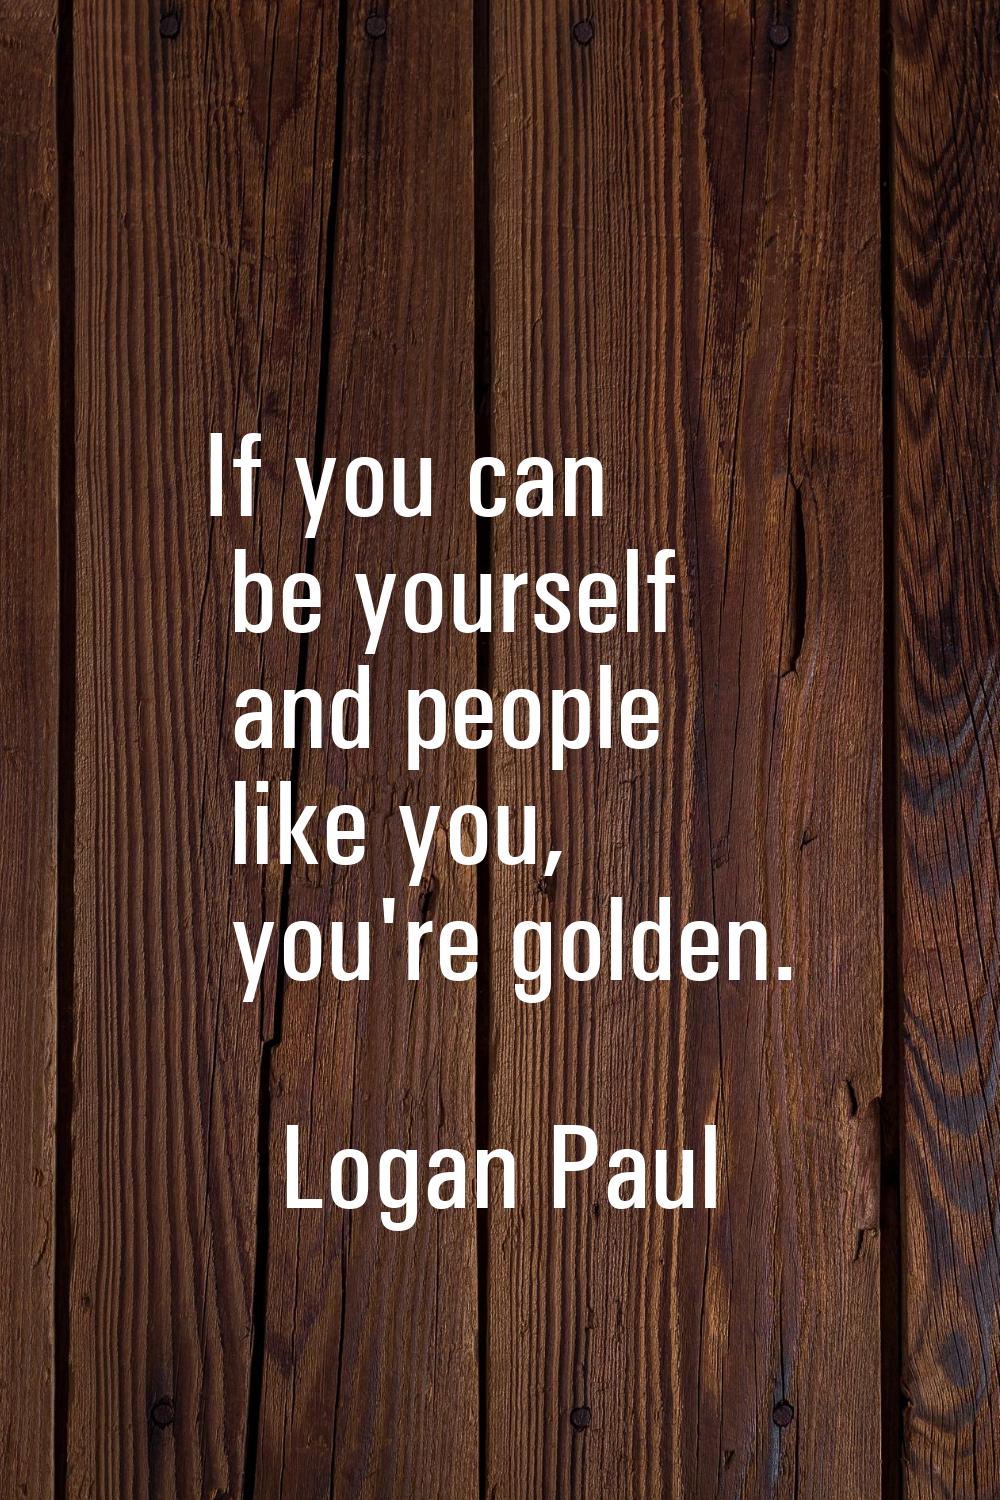 If you can be yourself and people like you, you're golden.